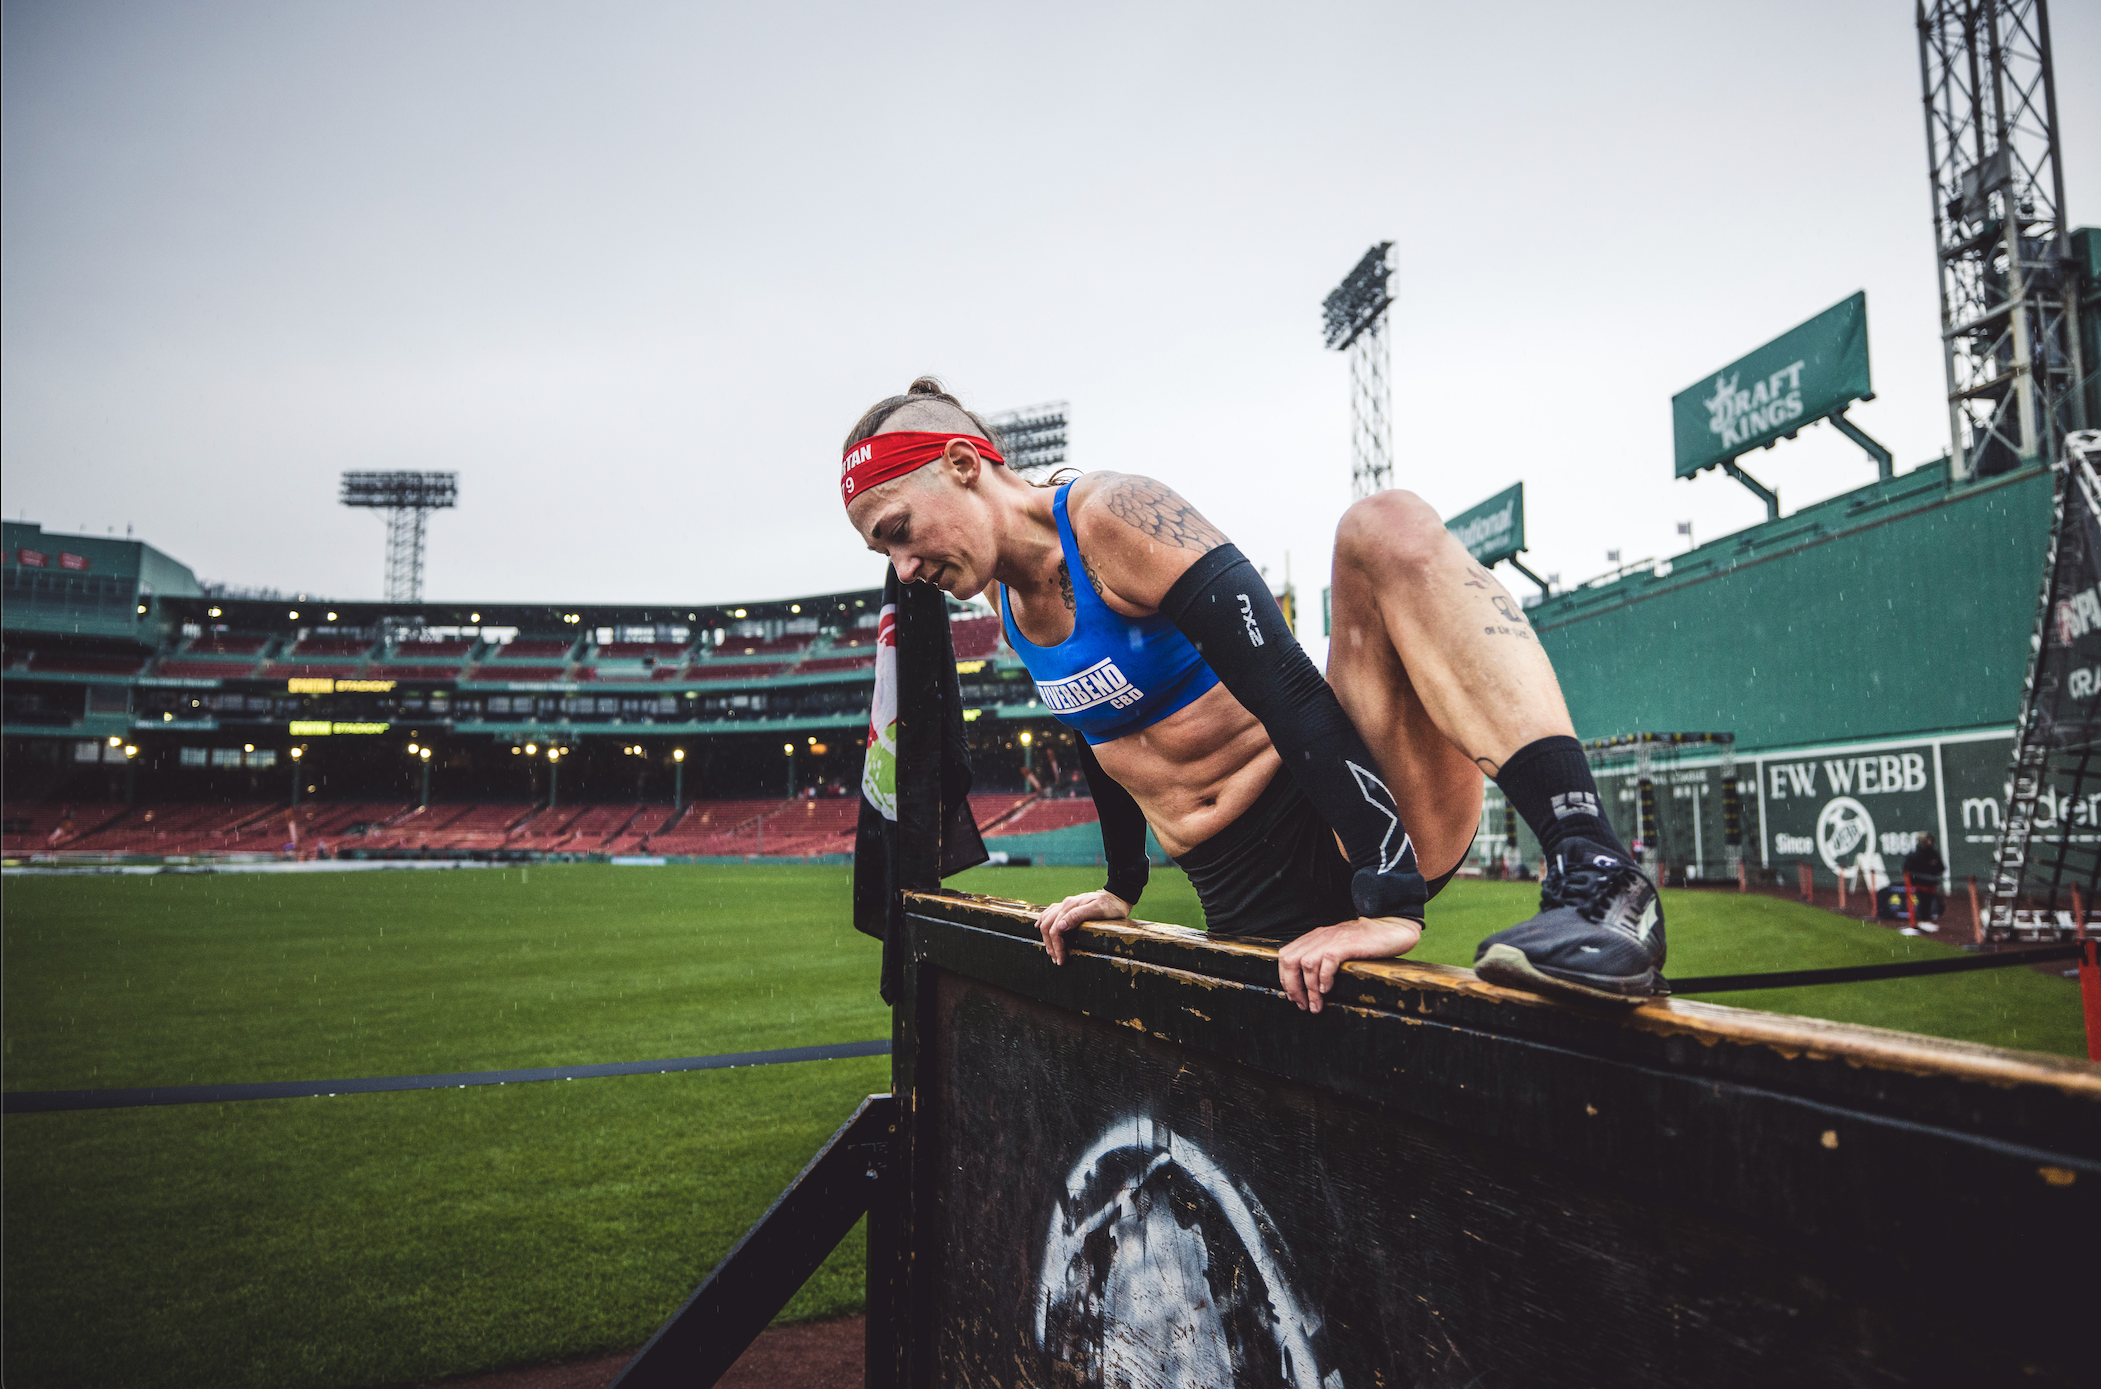 a spartan racer completing a 4 foot over wall obstacle at a stadion race